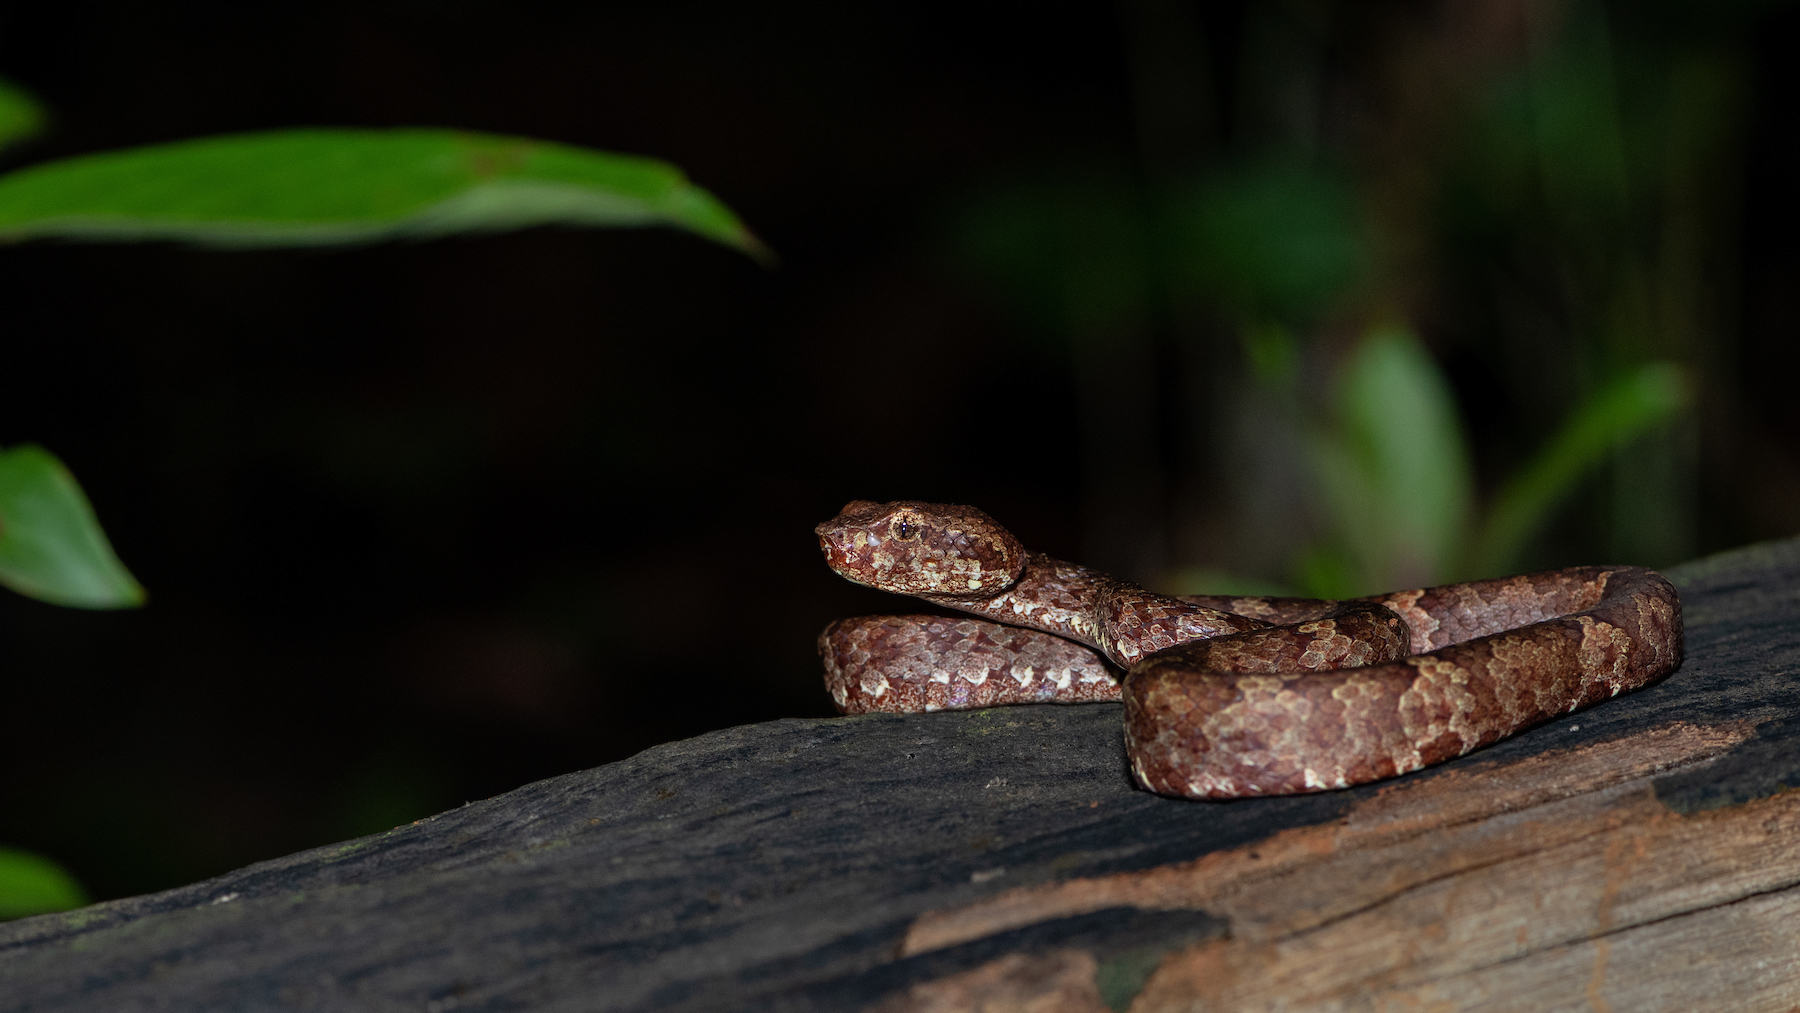 A brown morph of the Malabar pit viper. This snake’s willingness to remain still, and its colour and markings make it an ideal and photogenic subject.  Photo: Shreeram MV